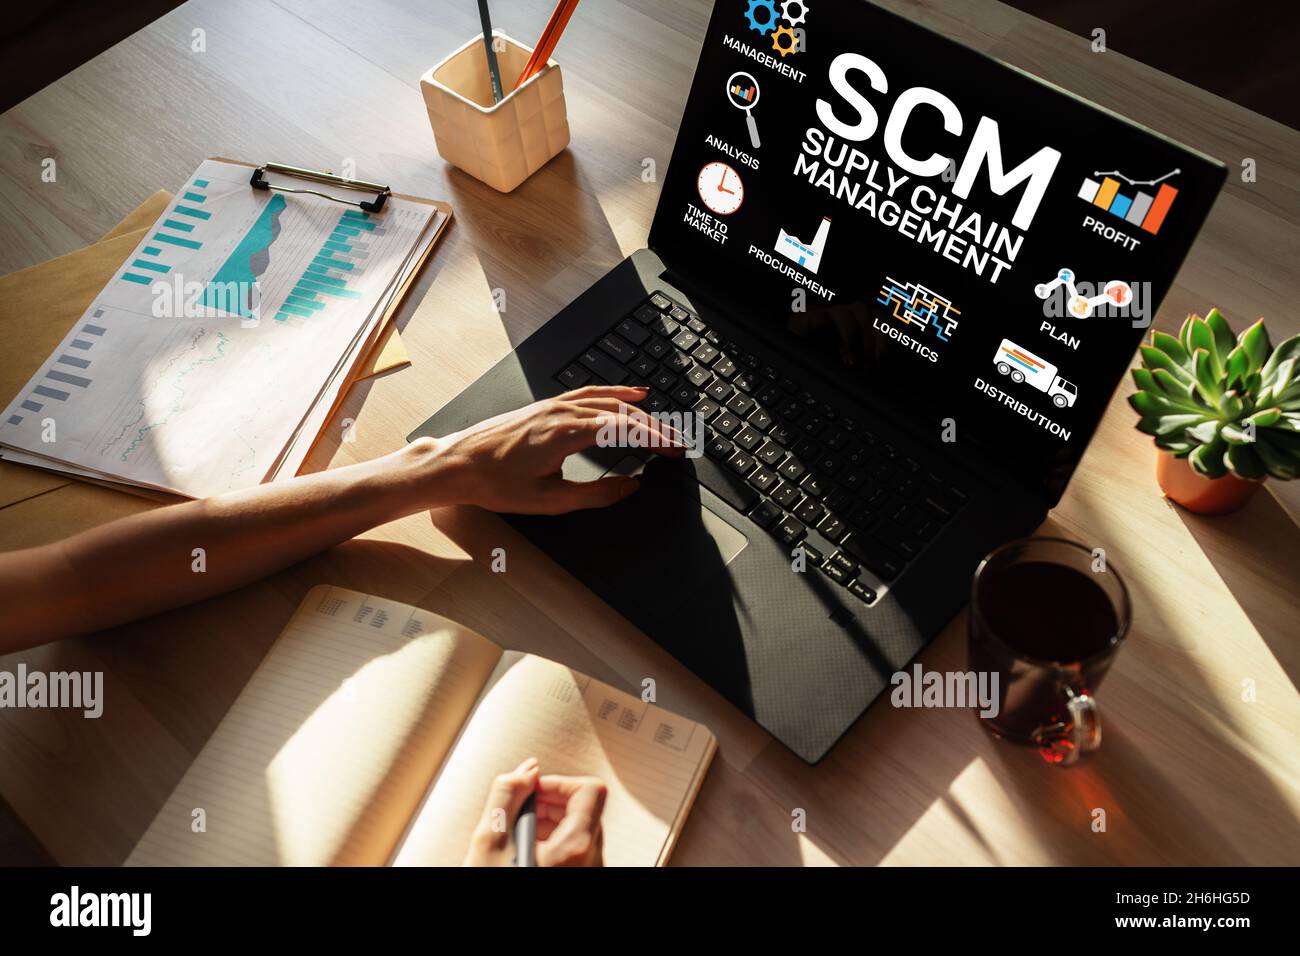 SCM - Supply Chain Management and business strategy concept on the screen. Stock Photo